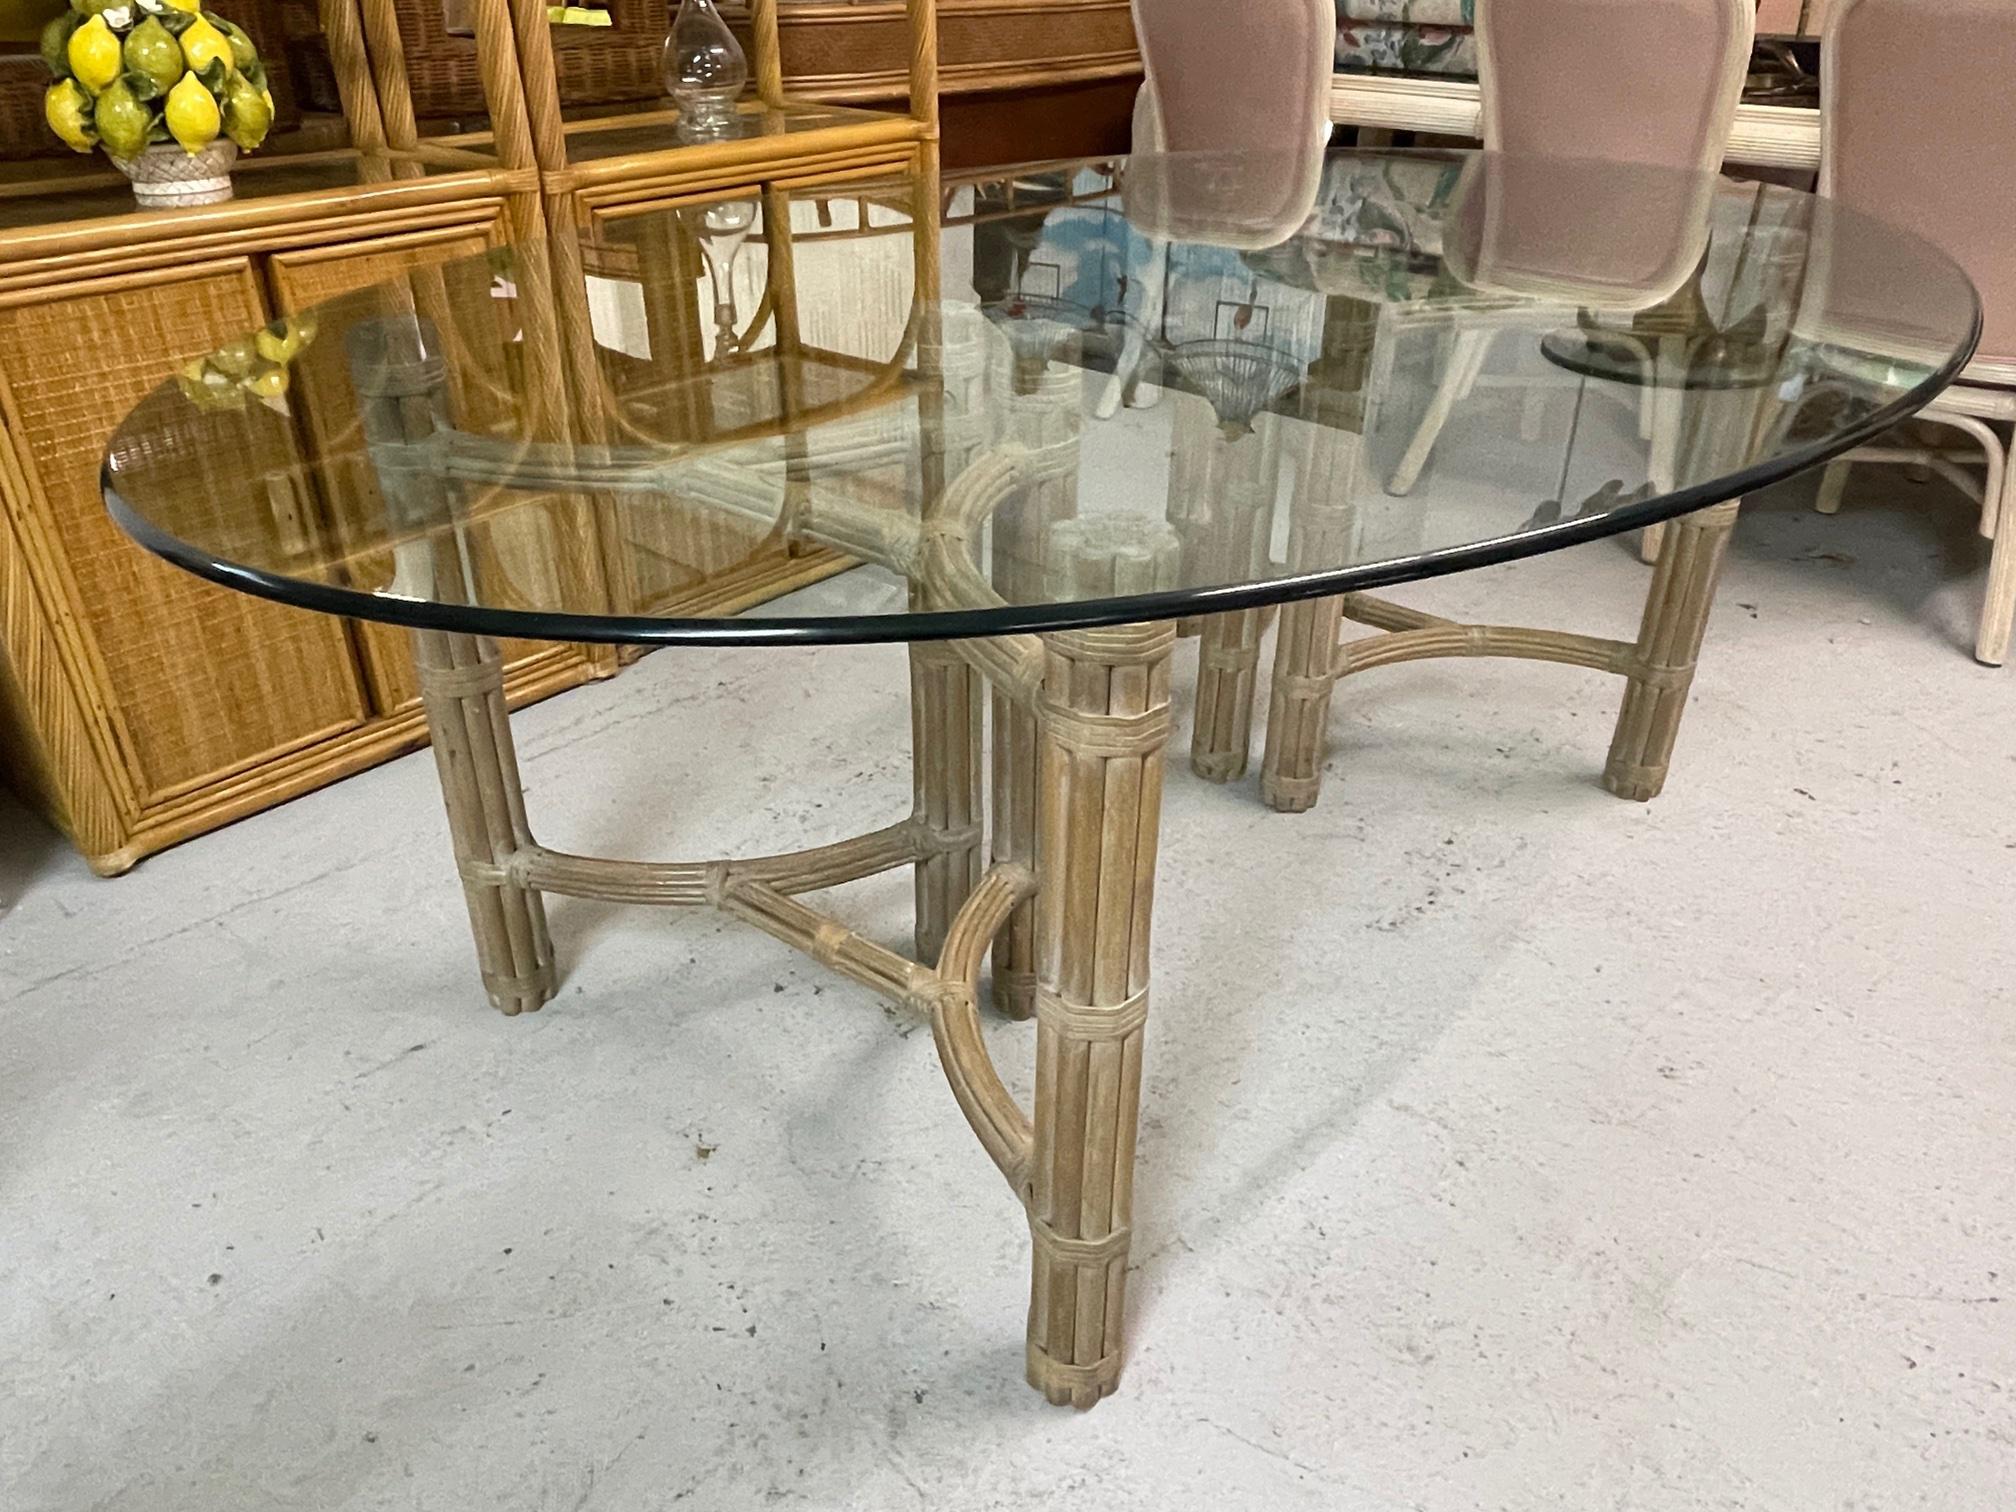 Double pedestal dining table by McGuire features a steel core sheathed in rattan and a glass top. Good condition with minor imperfections consistent with age. May exhibit scuffs, marks, or wear, see photos for details.
For a shipping quote to your